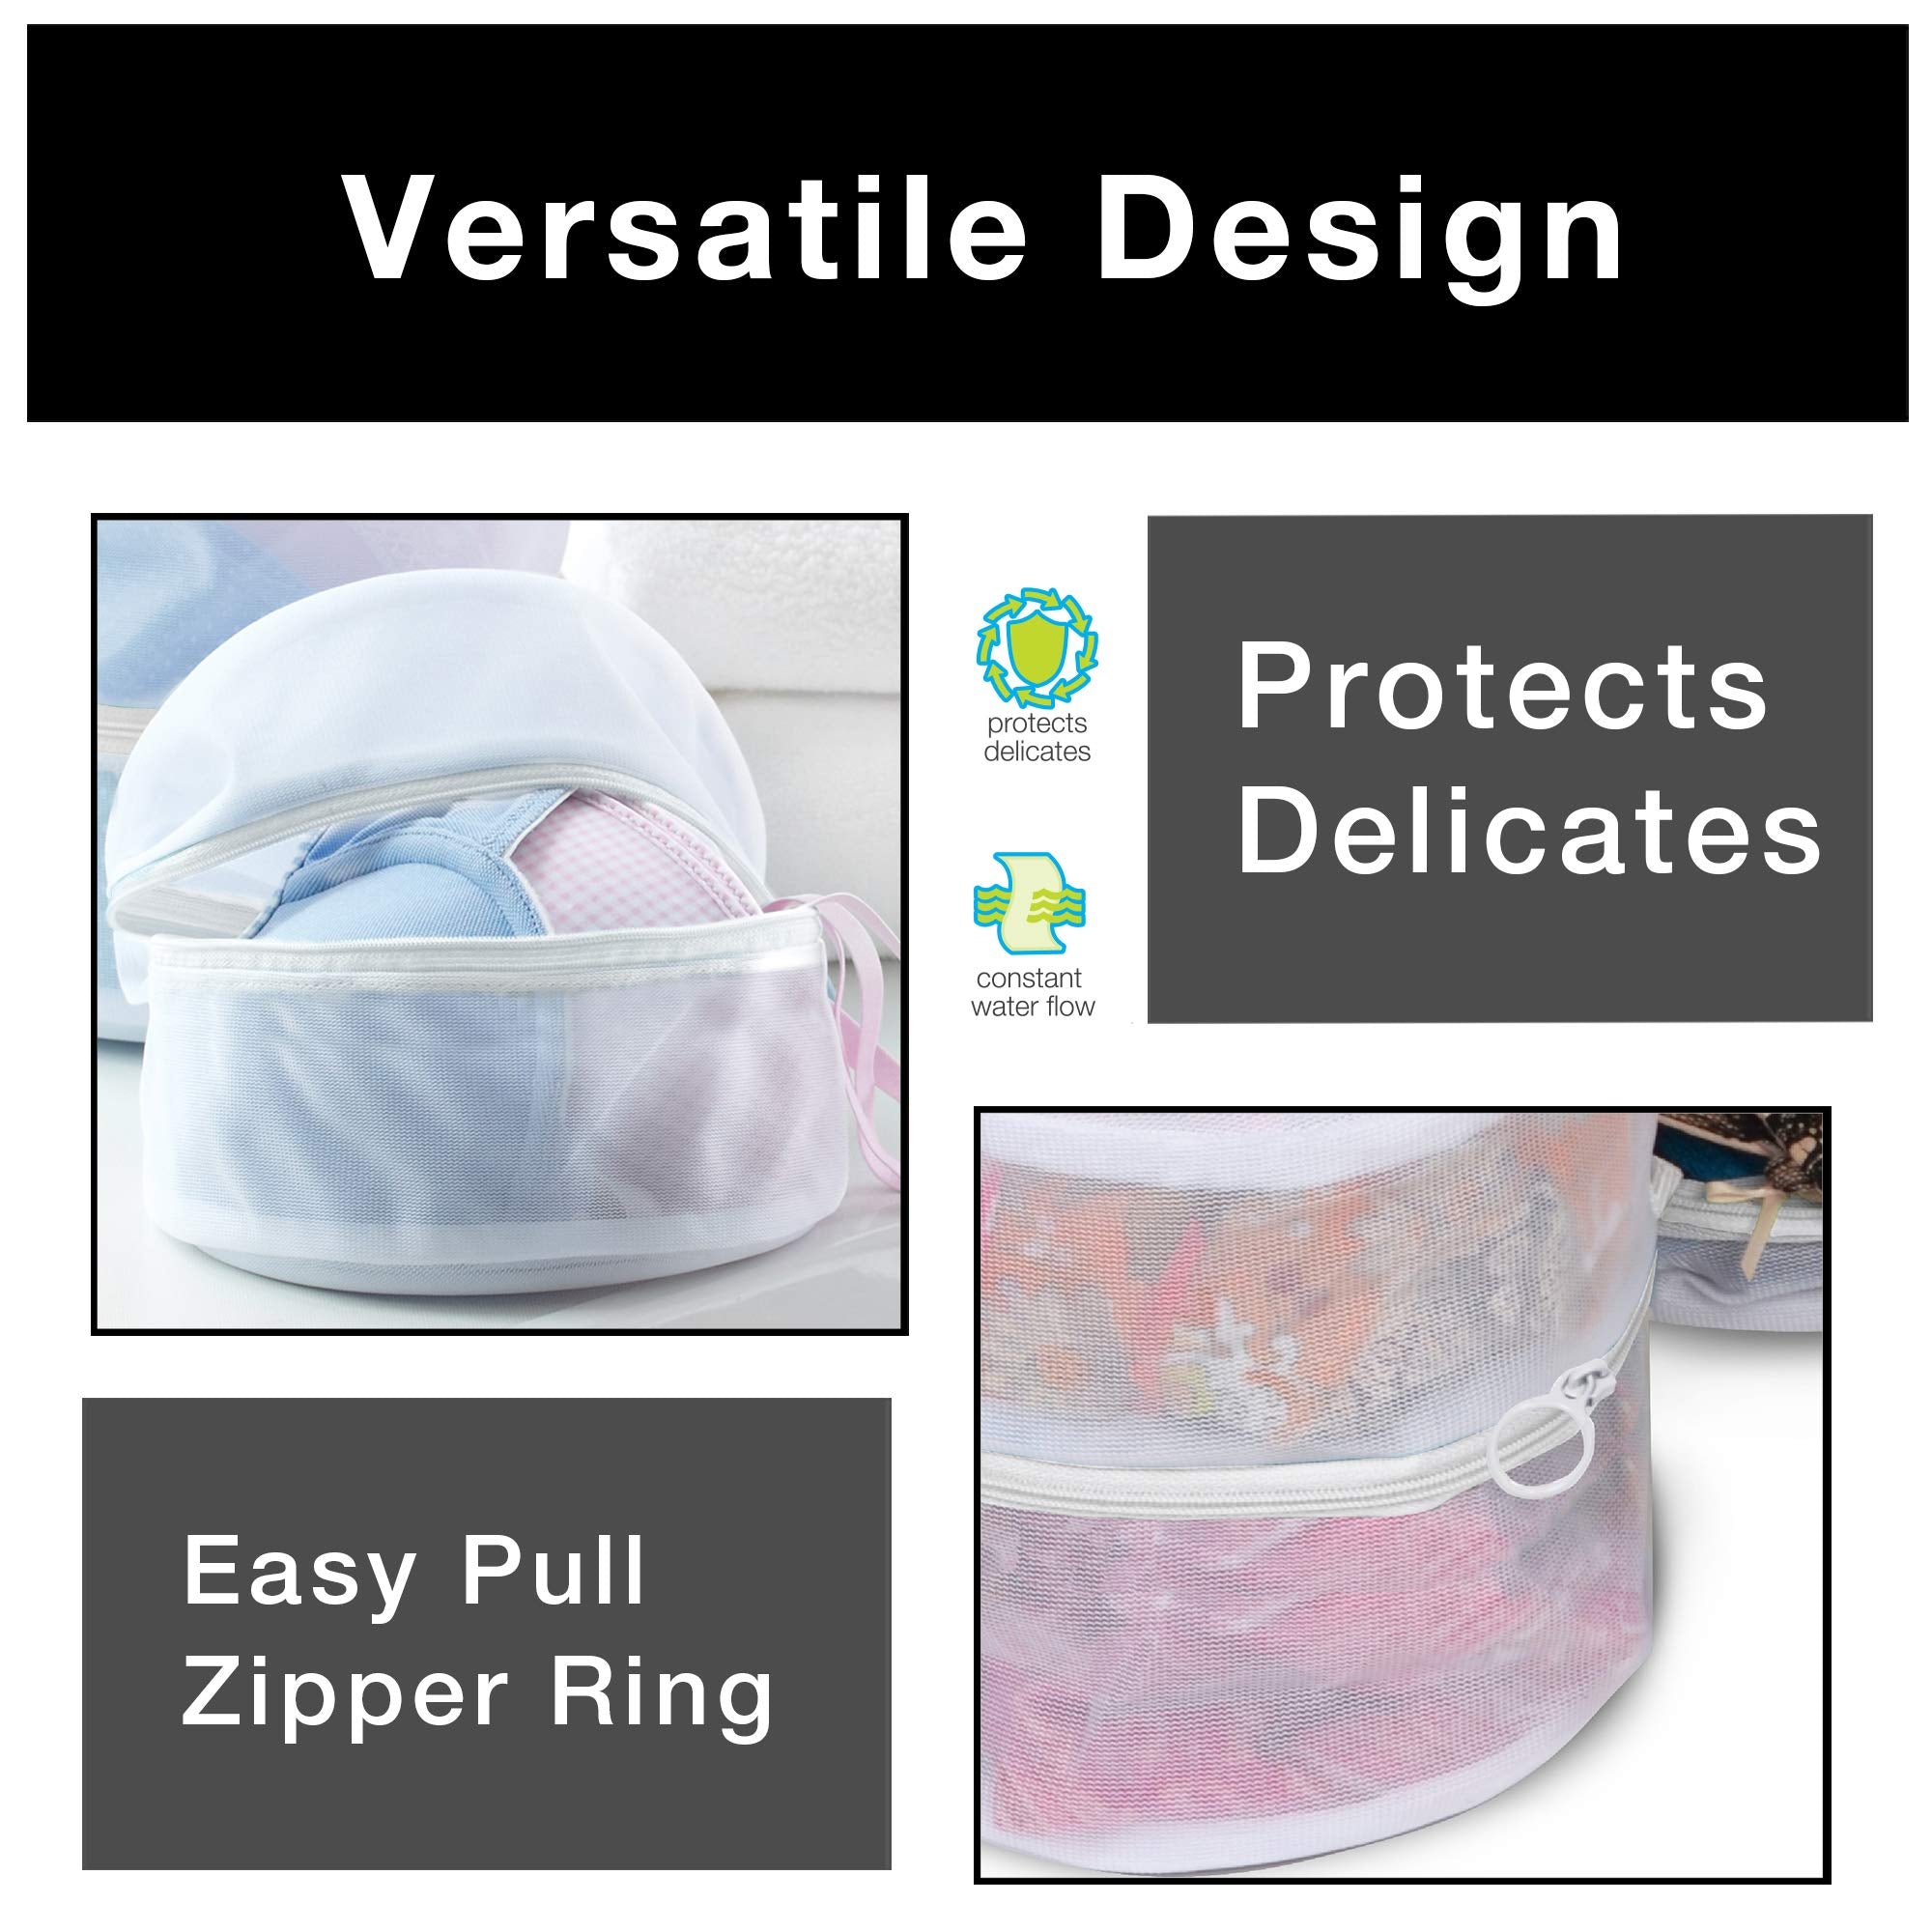 Intimate Wash Bag with Safety Zipper - Set of 2 - 6.5 x 5.5 Inch - Smart Design® 4